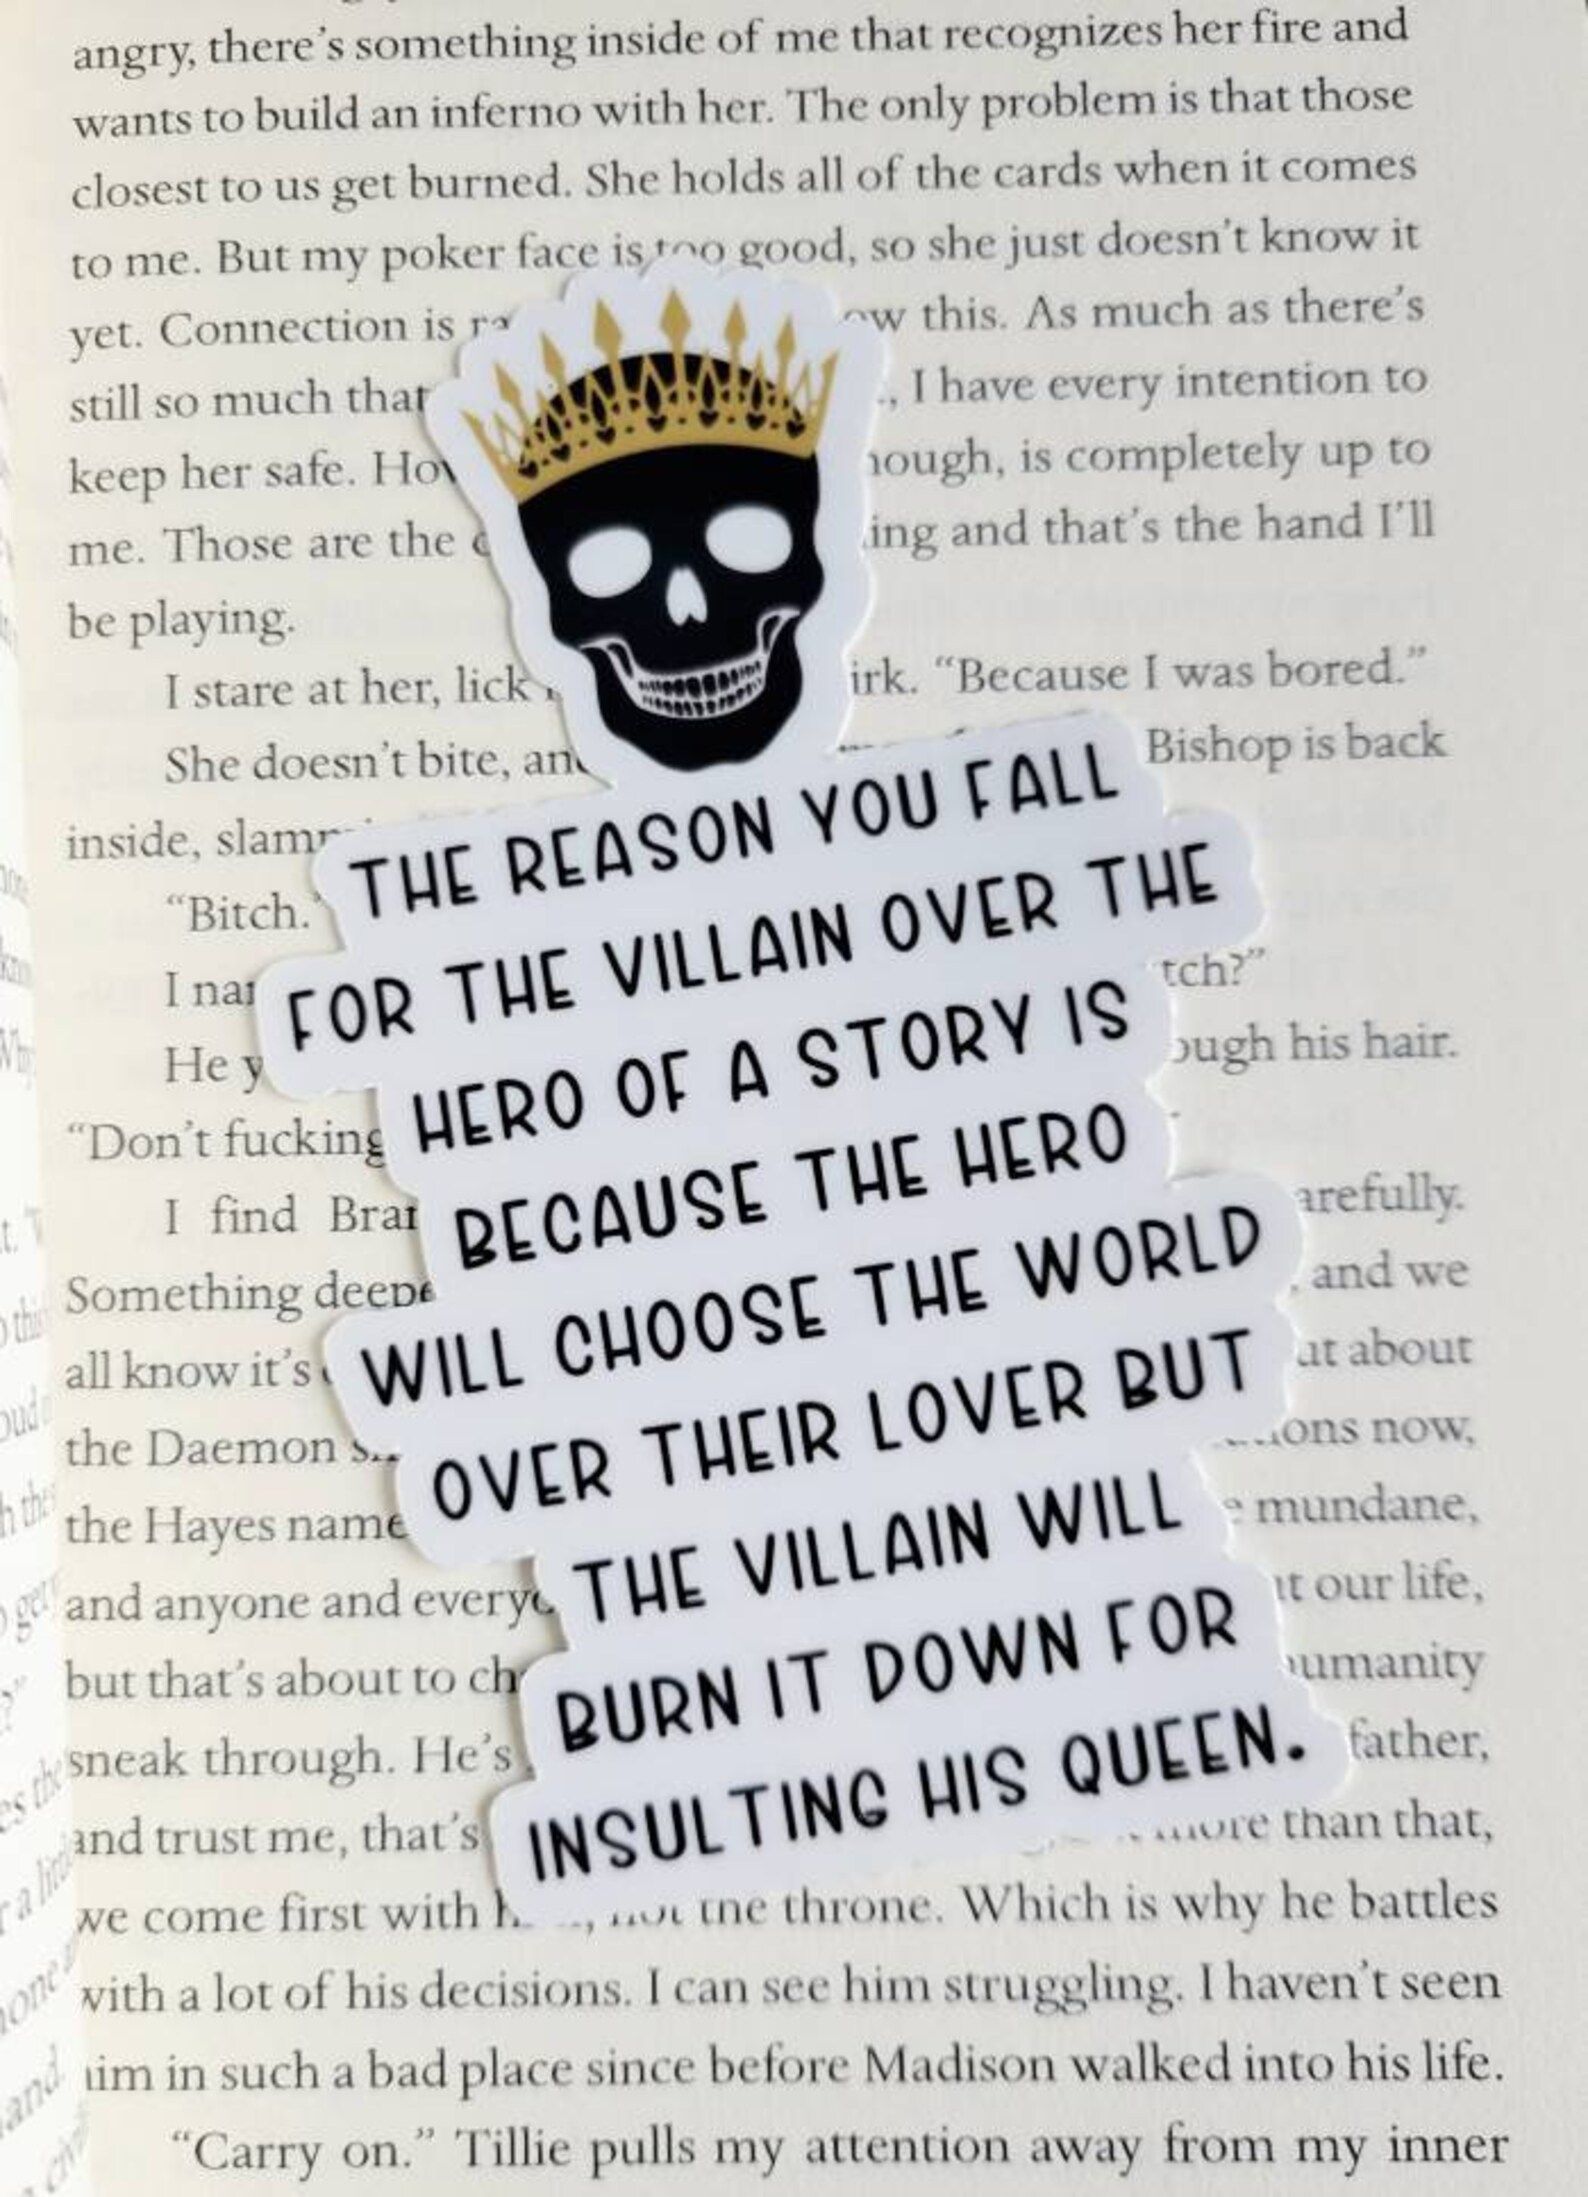 Vinyl sticker that reads "The reason you fall for the villain over the hero of a story is because the hero will choose the world over their lover but the villain will burn it down for insulting his queen."